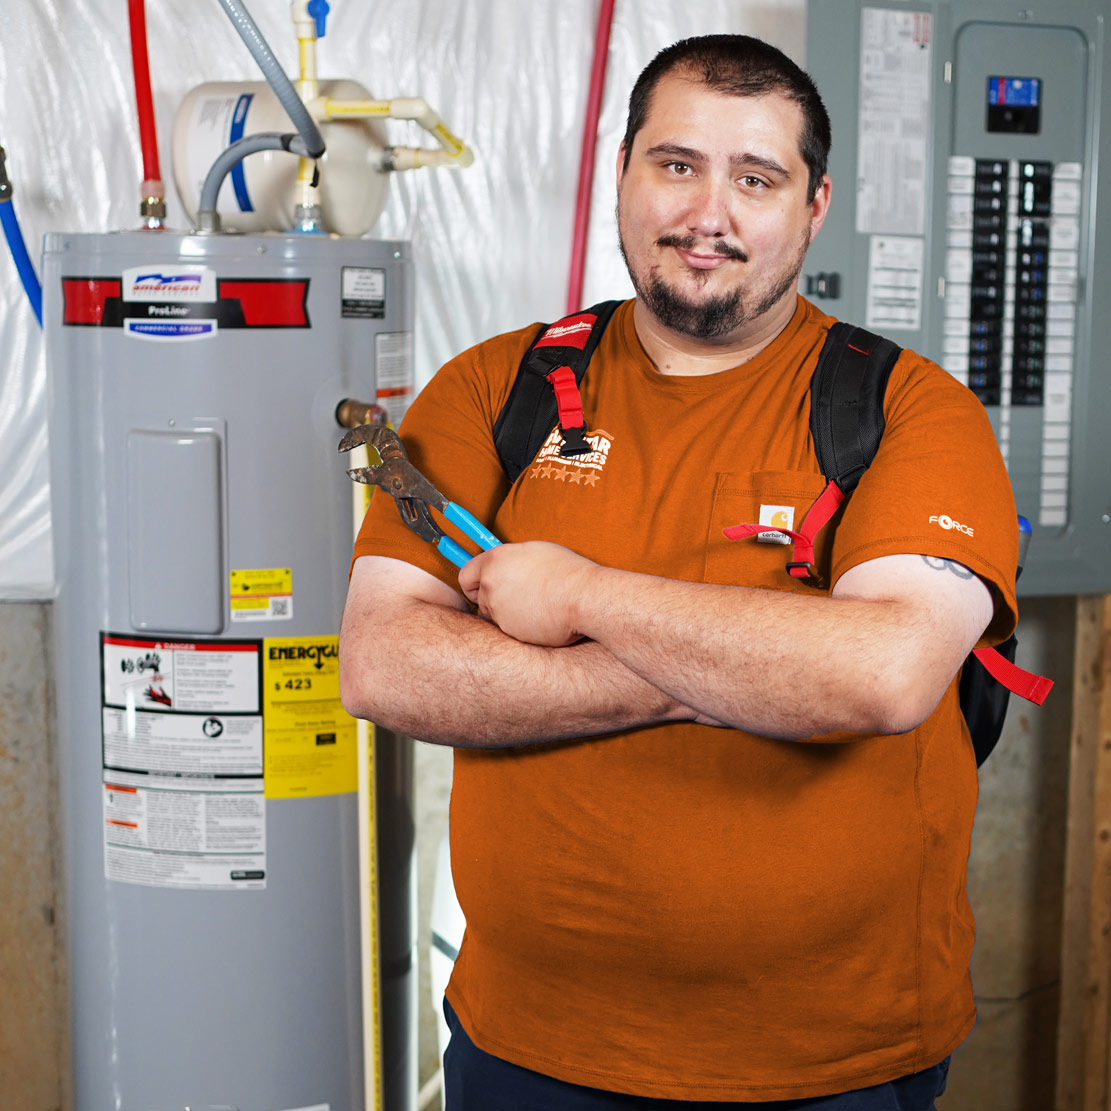 Water Heater Services & Solutions in Beavercreek, OH